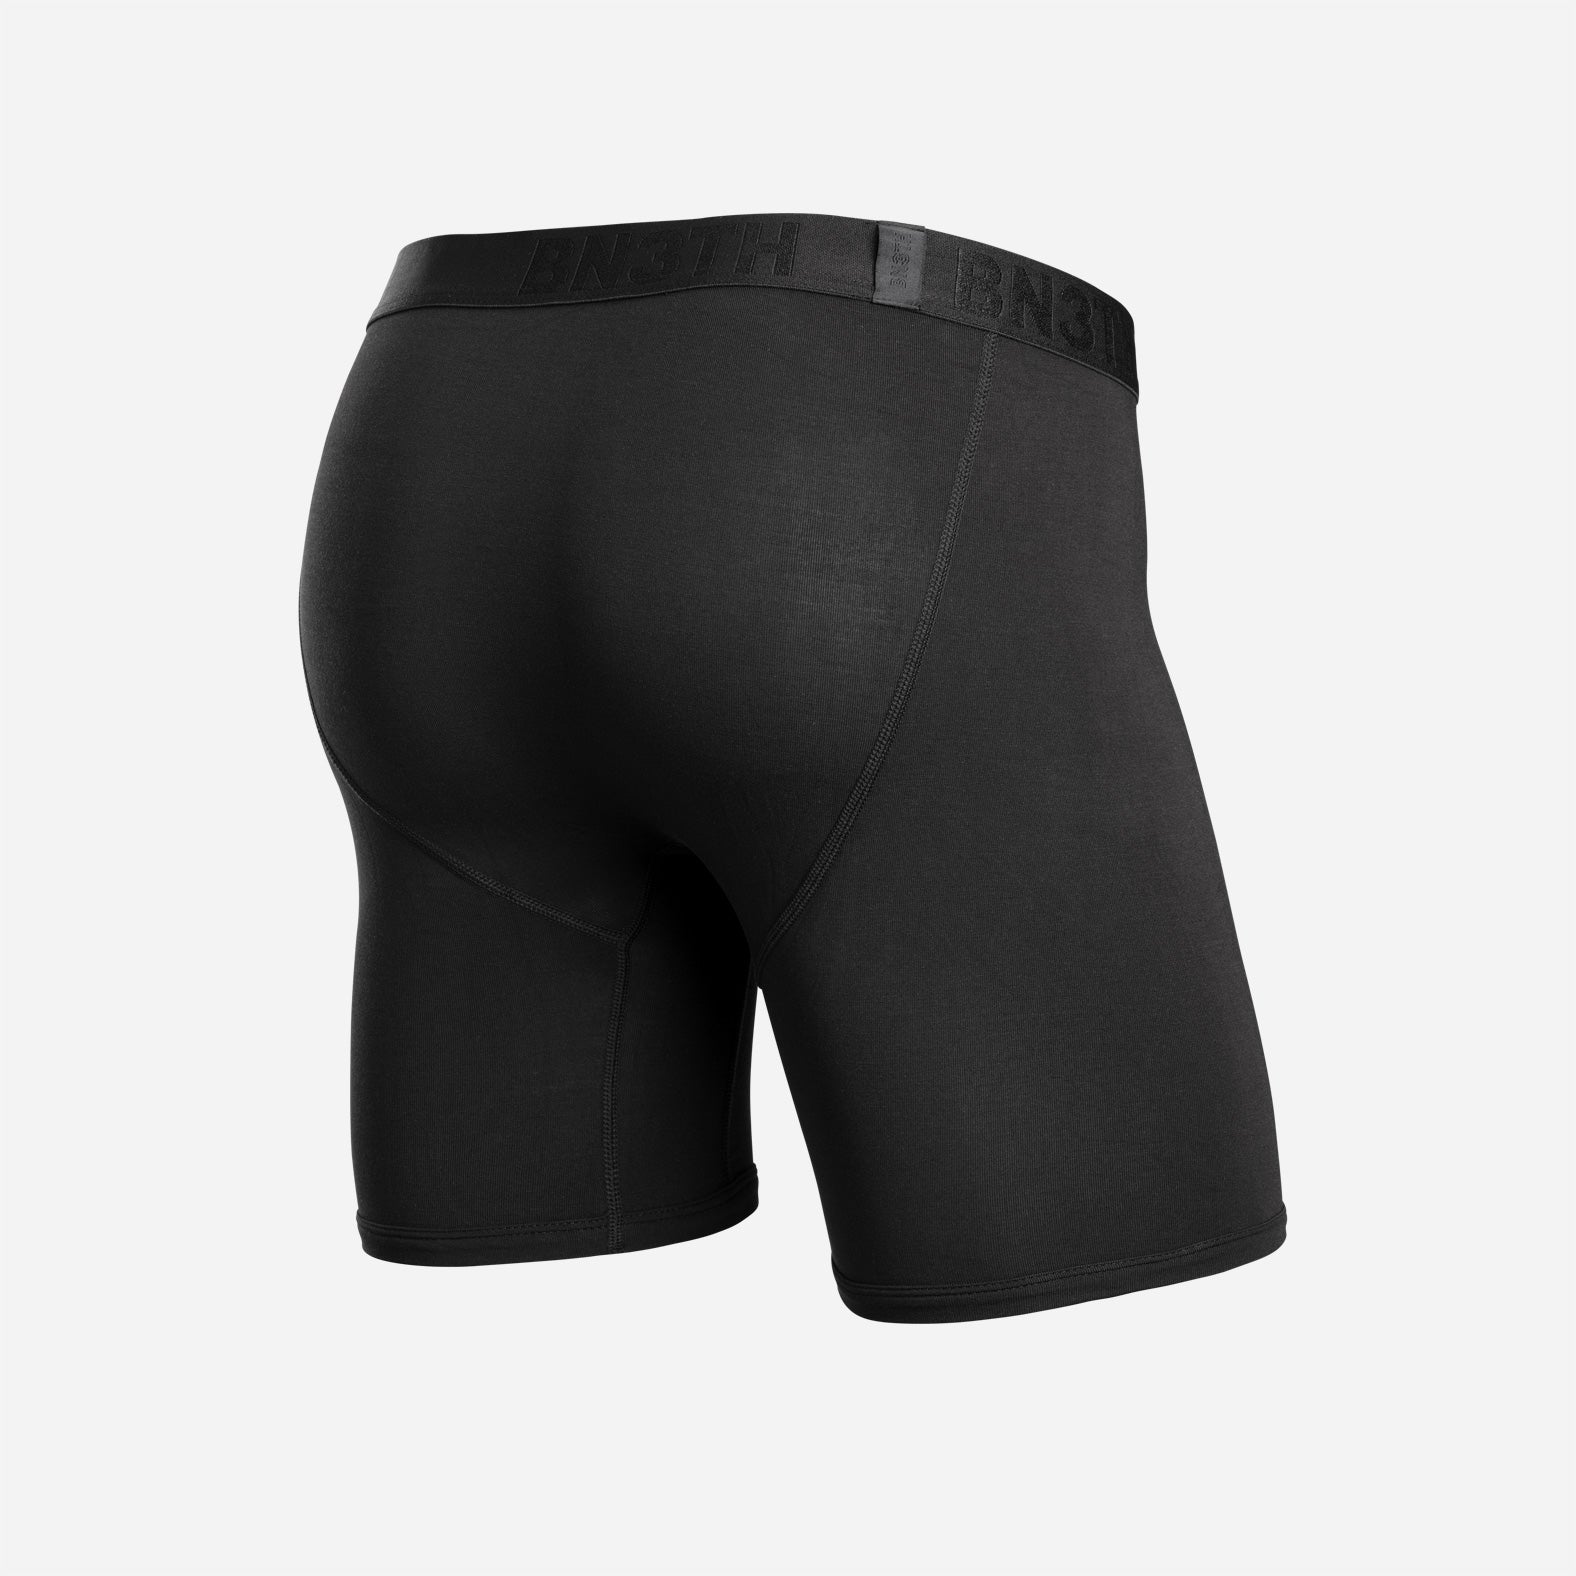 BN3TH brings comfort, sustainability to men's underwear for golfers